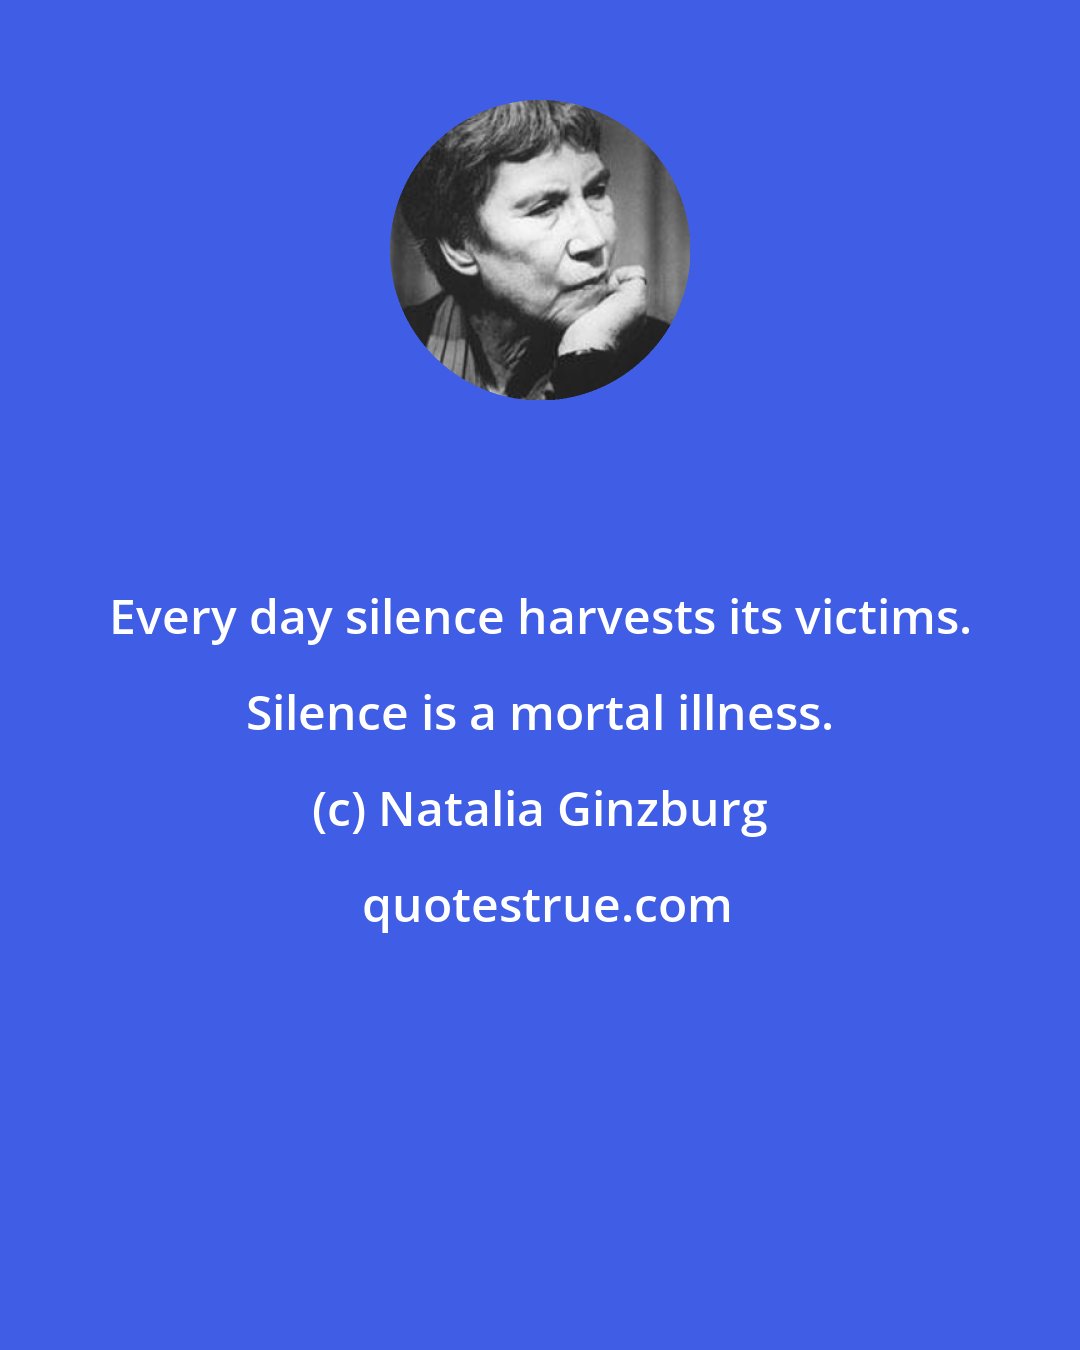 Natalia Ginzburg: Every day silence harvests its victims. Silence is a mortal illness.